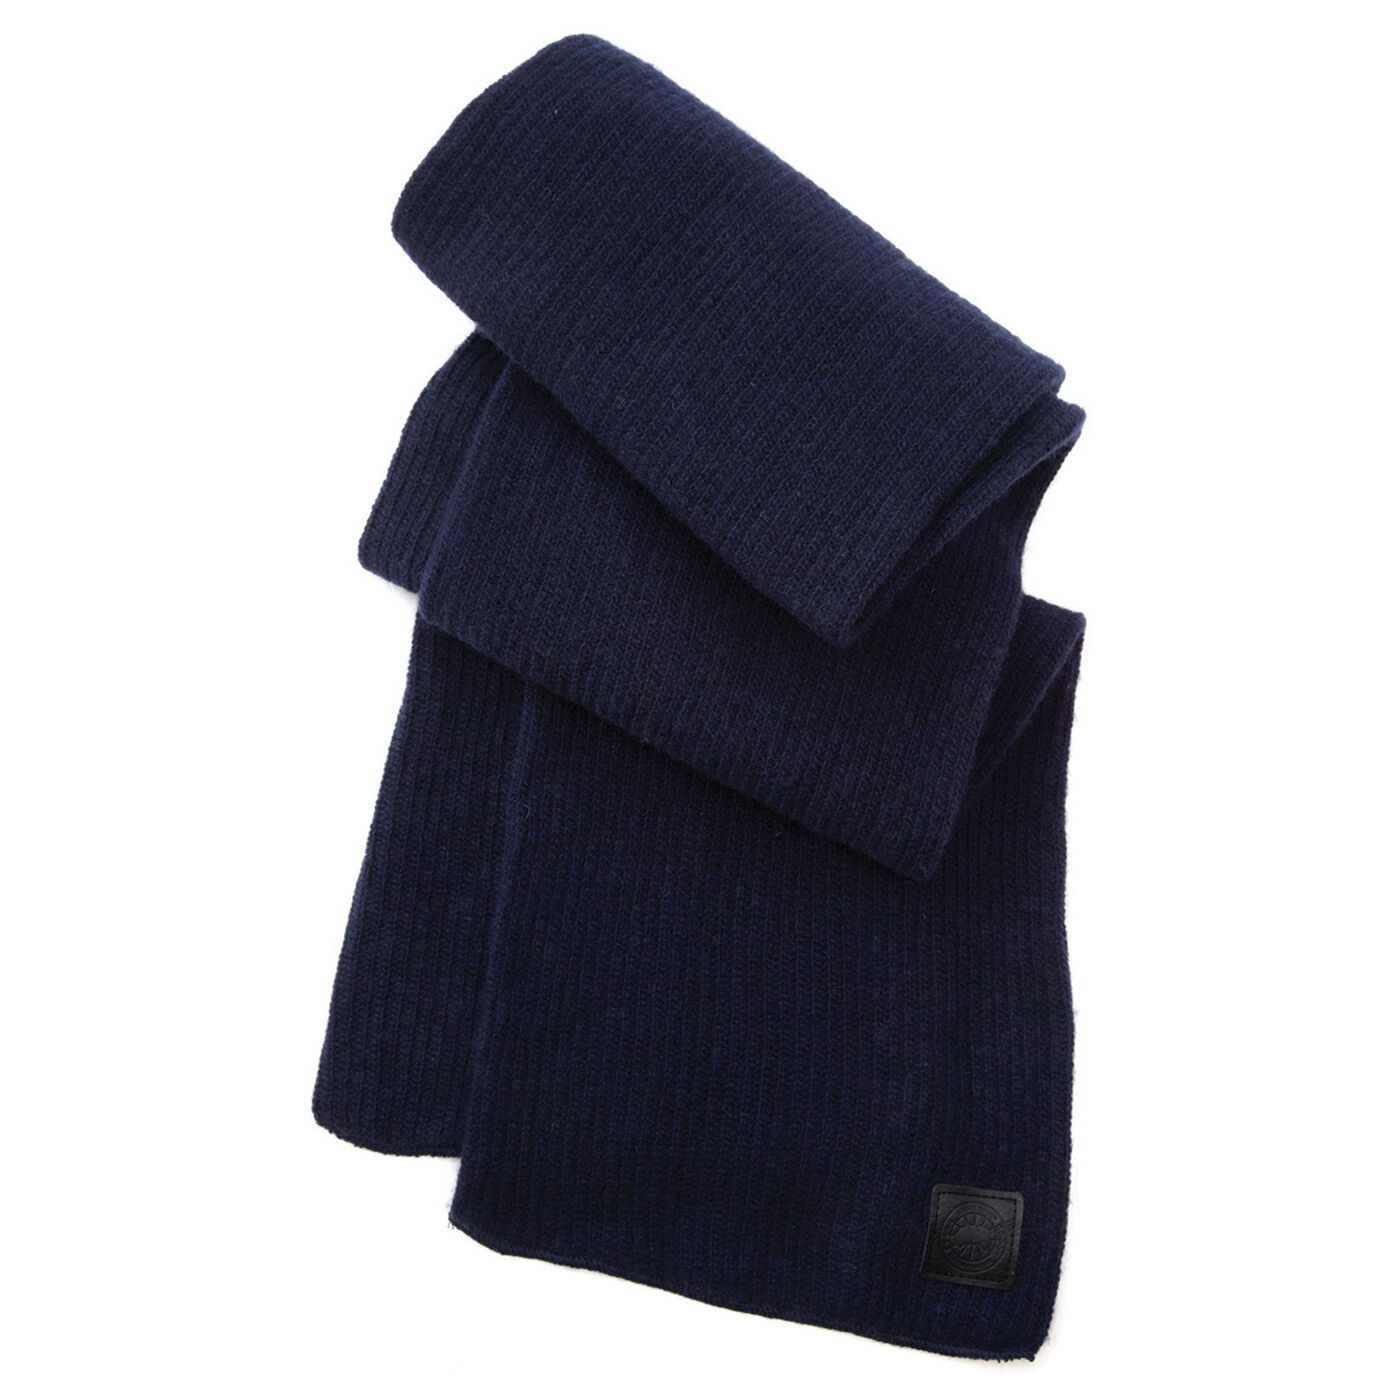 Unisex Cashmere Scarf | Canada Goose | Sporting Life Online